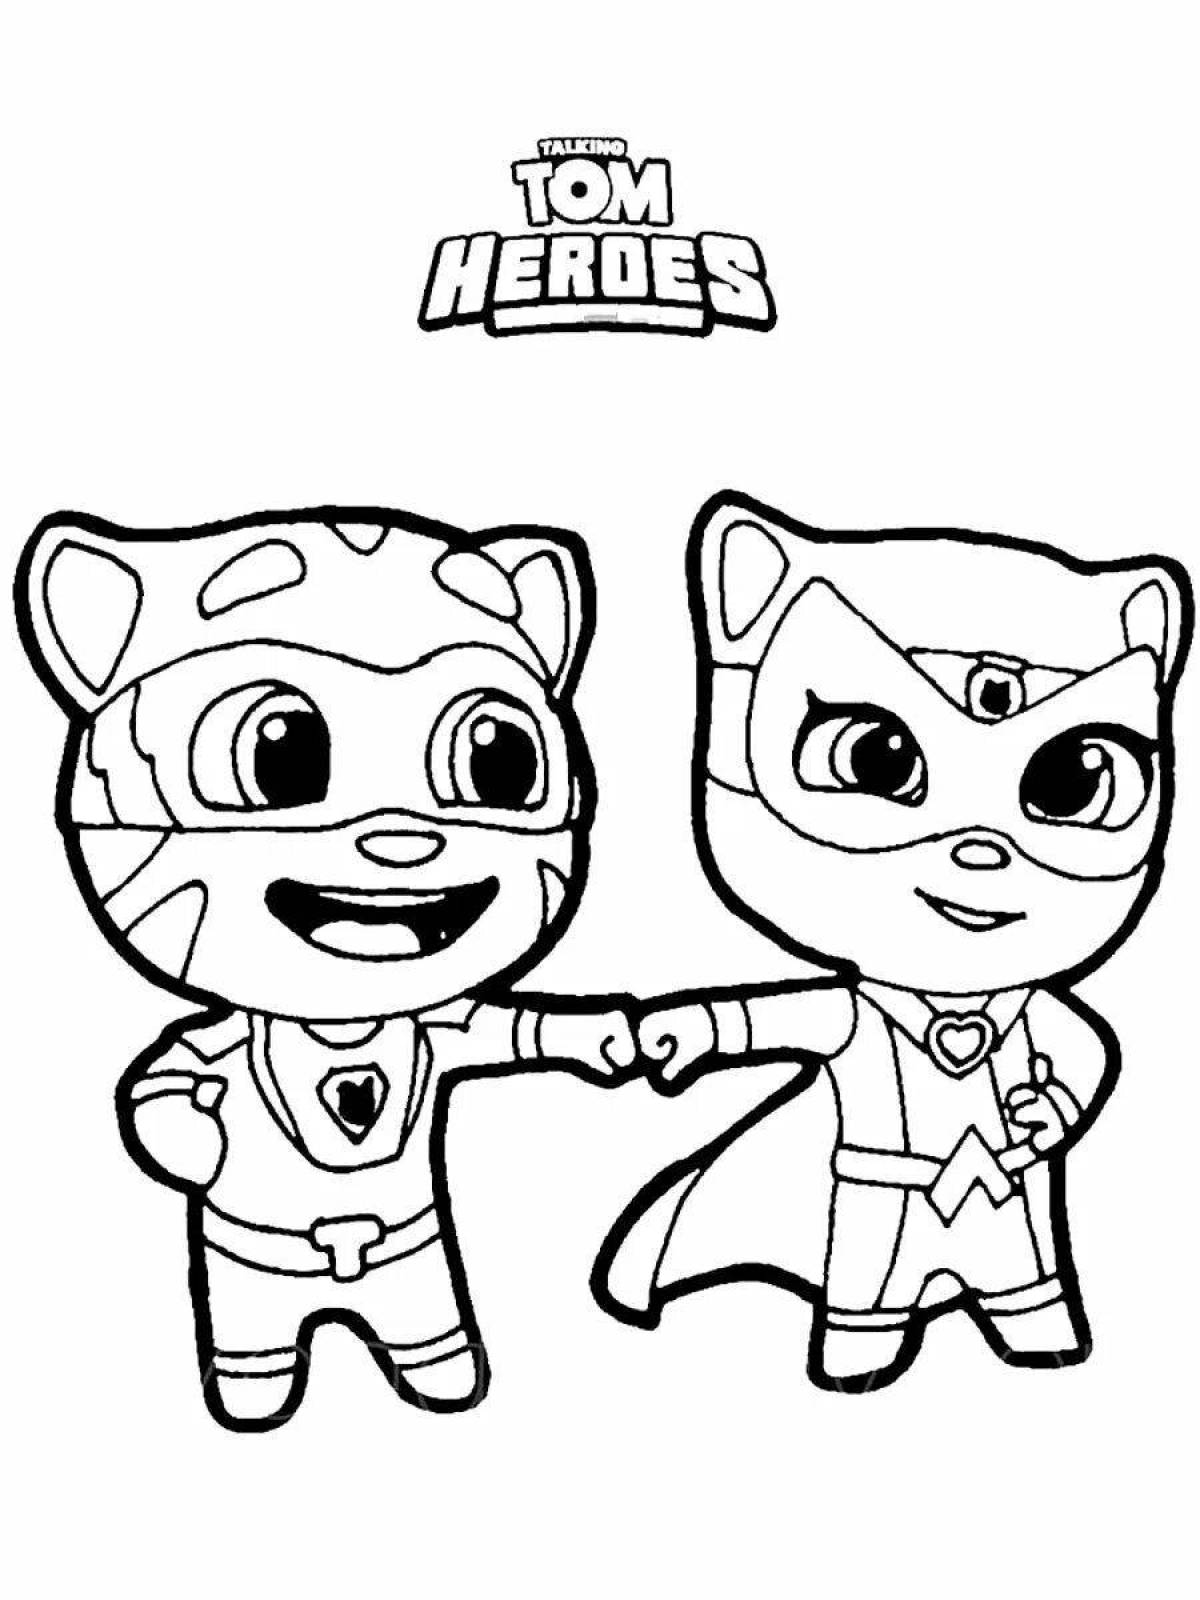 Adorable tom and angela coloring pages